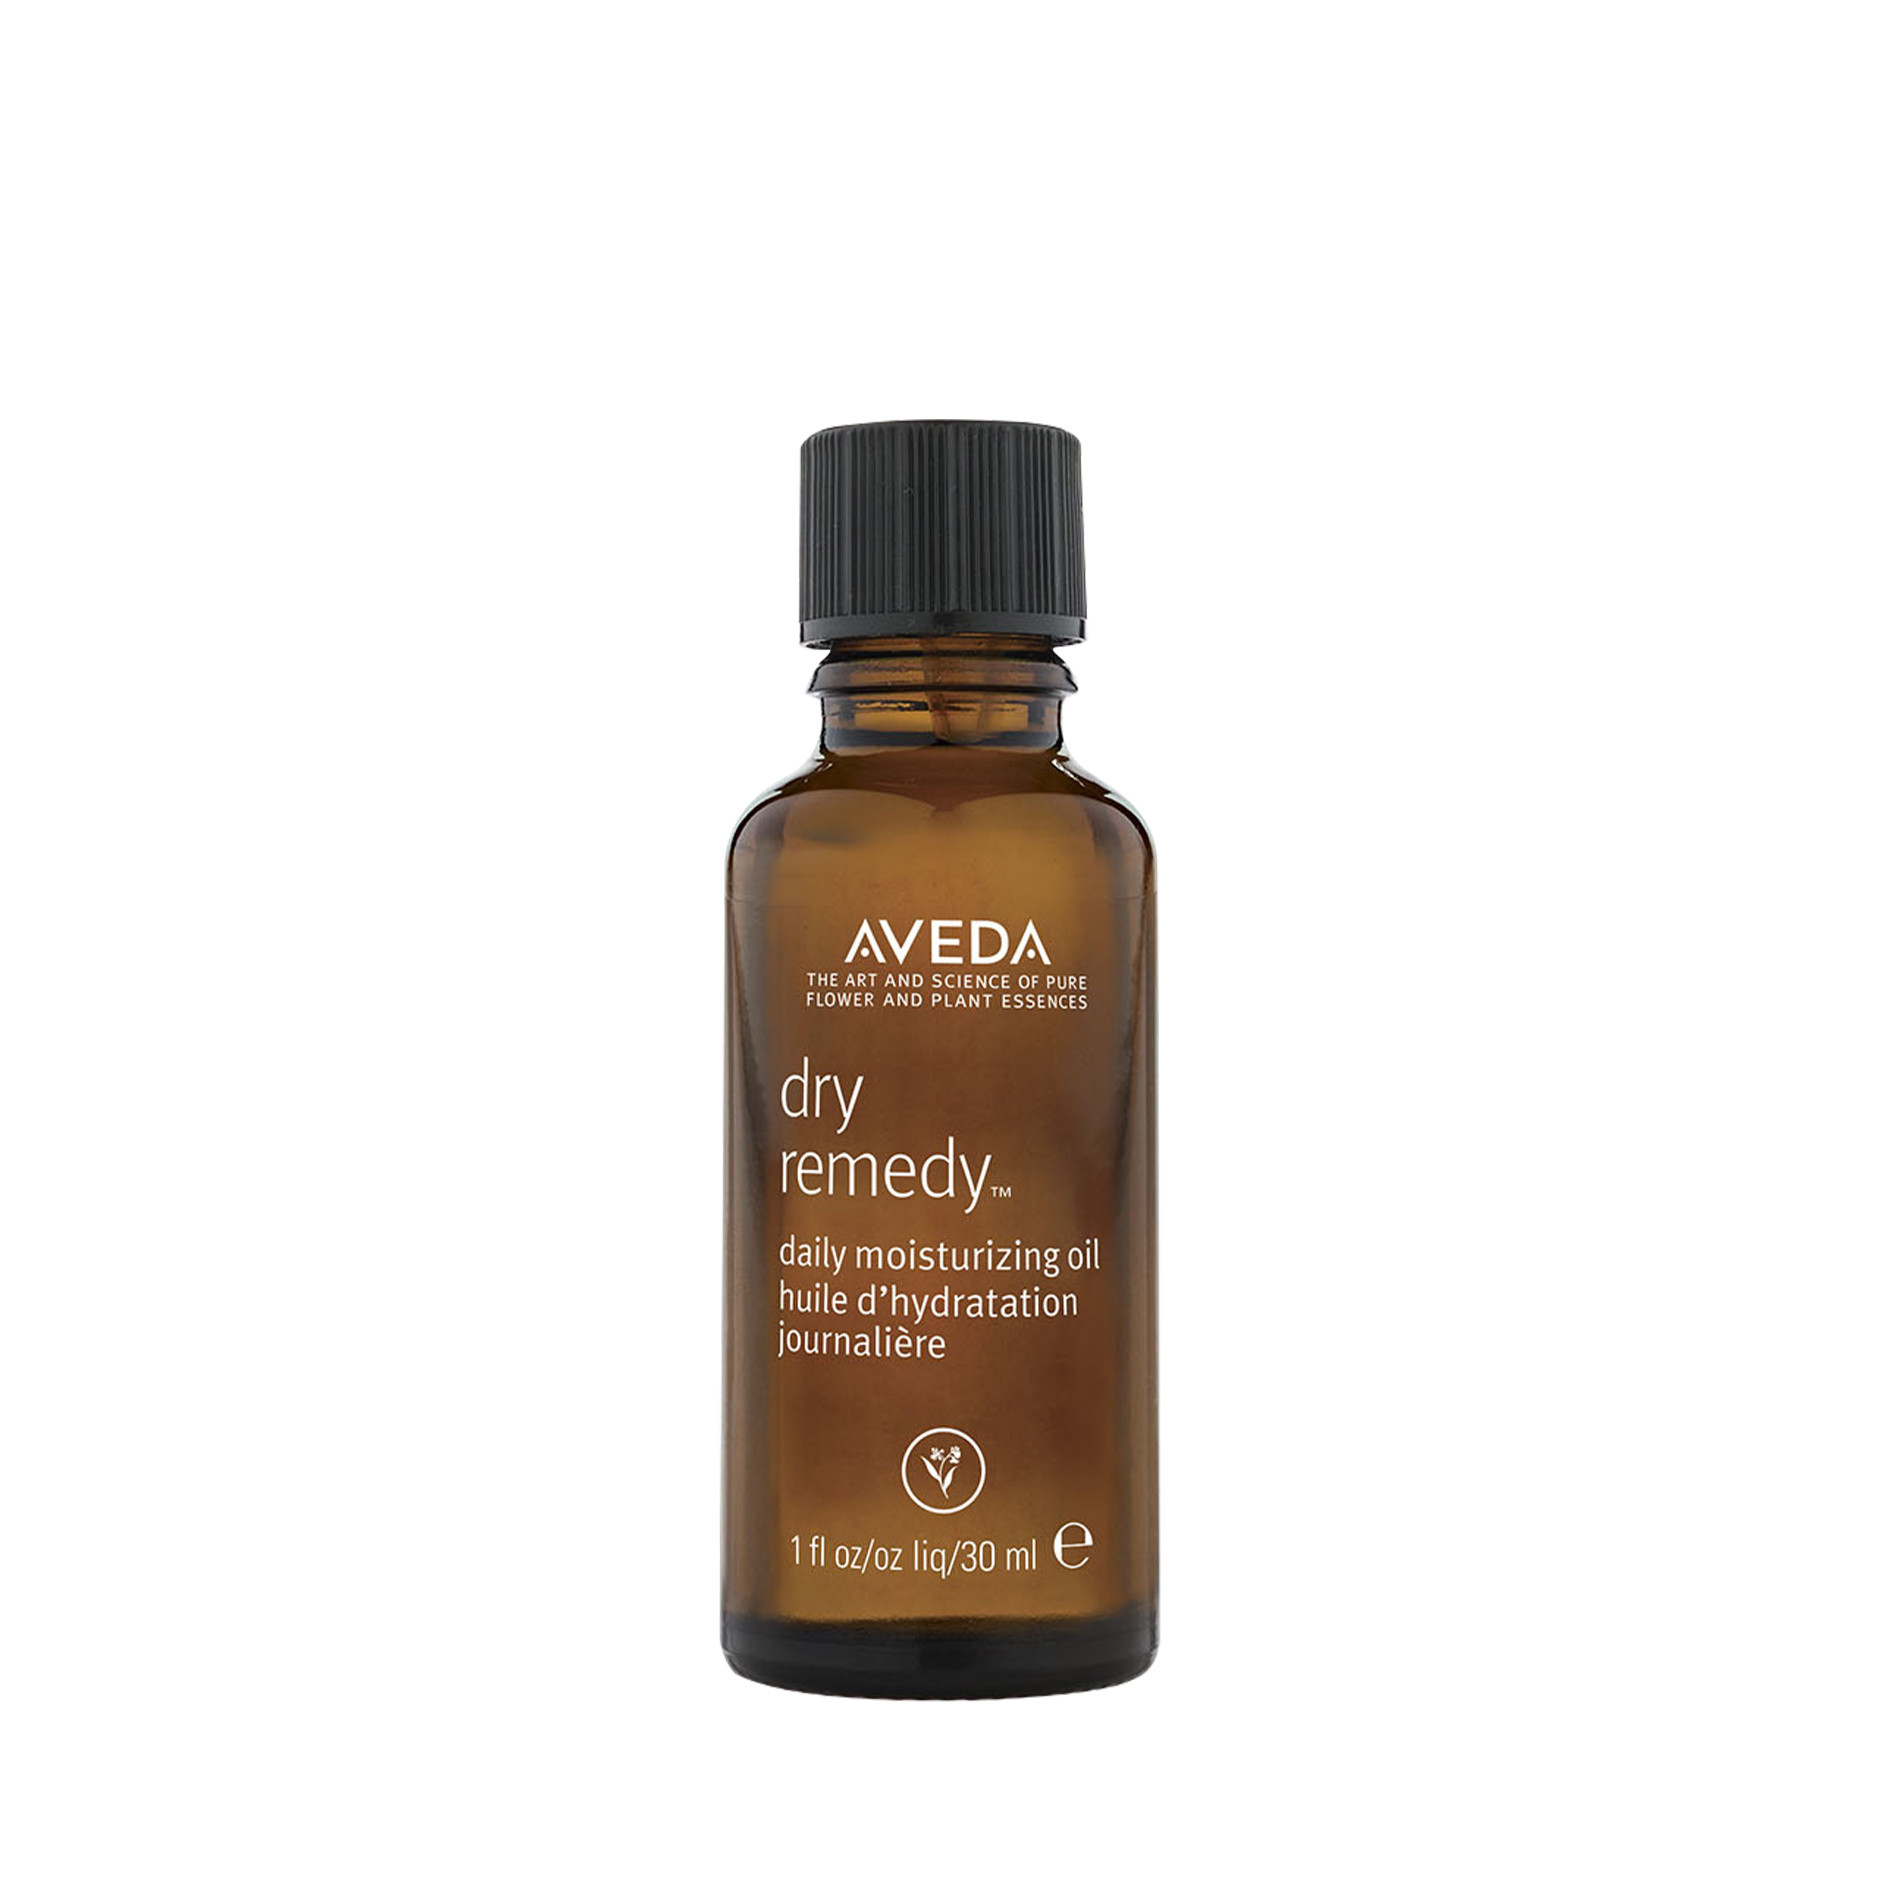 Aveda dry remedy daily moisturizing oil 30 ml, Brown, large image number 0